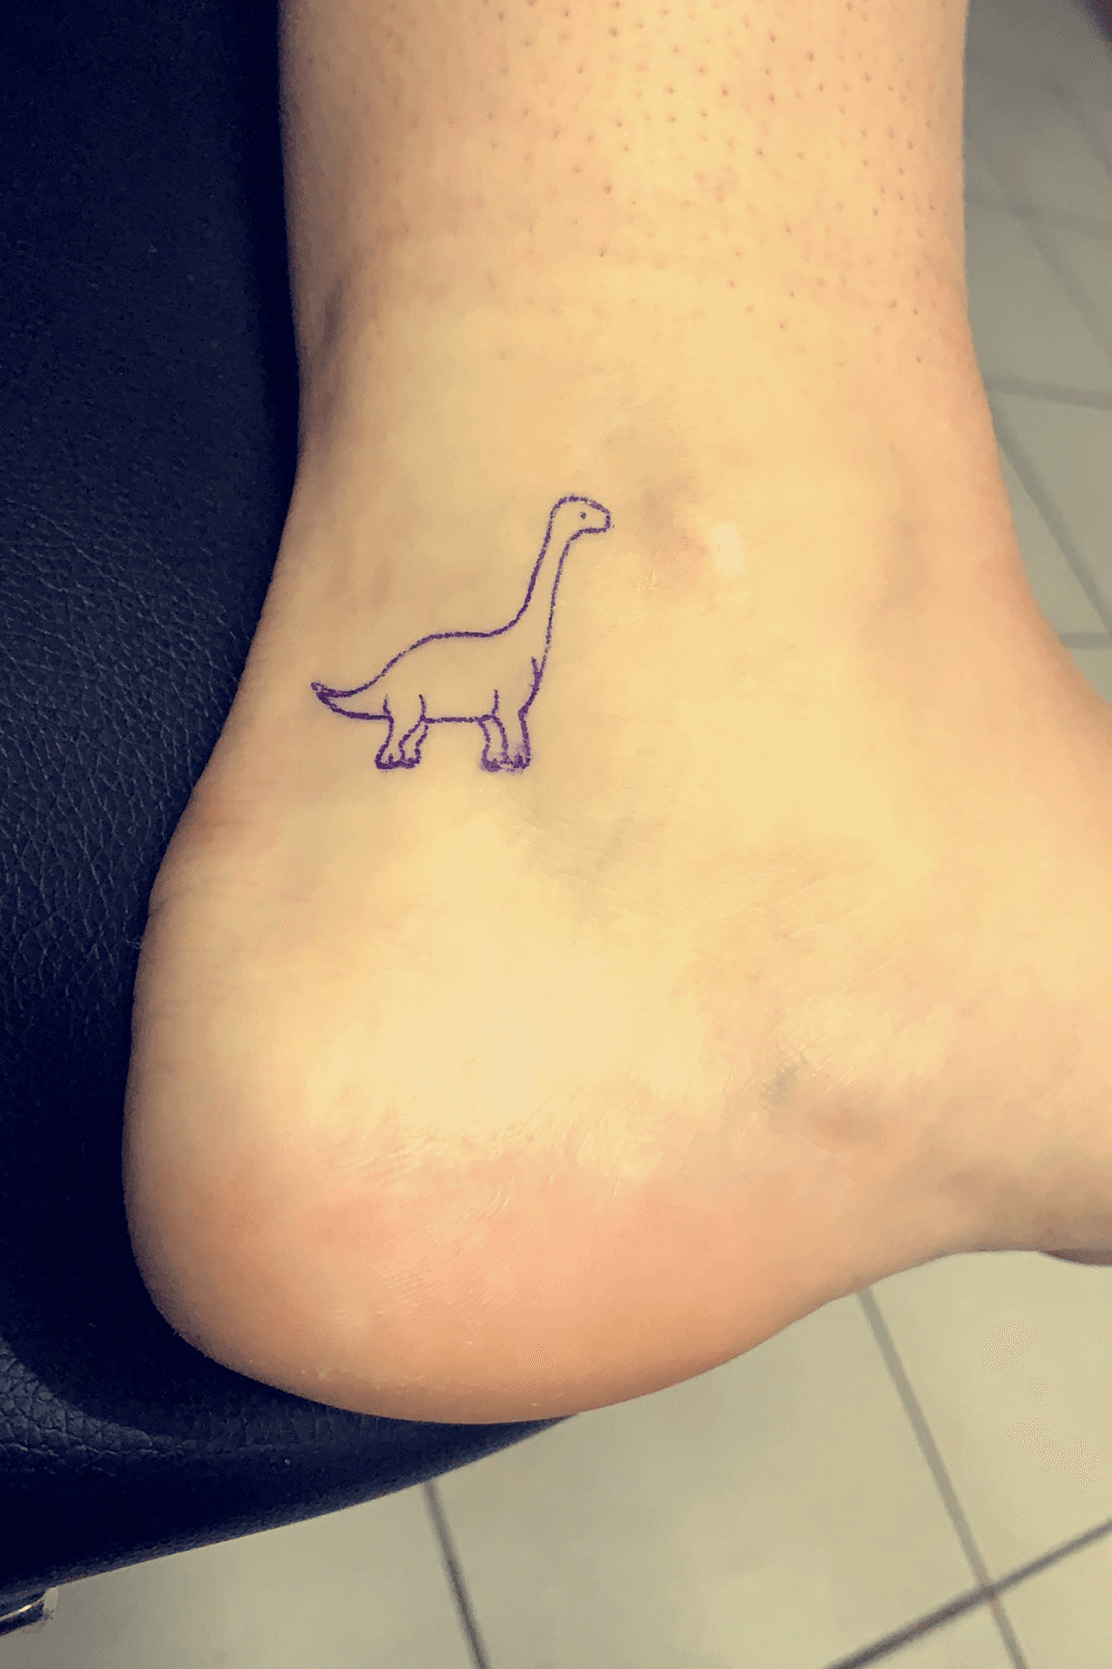 Minimalink  Art from susboomtattoo This tattoo was made in October last  year  Geometric Long Neck Dinosaur  with Flowers and Leaves  Tattoo  Geometric for the beautiful Maria  Thank